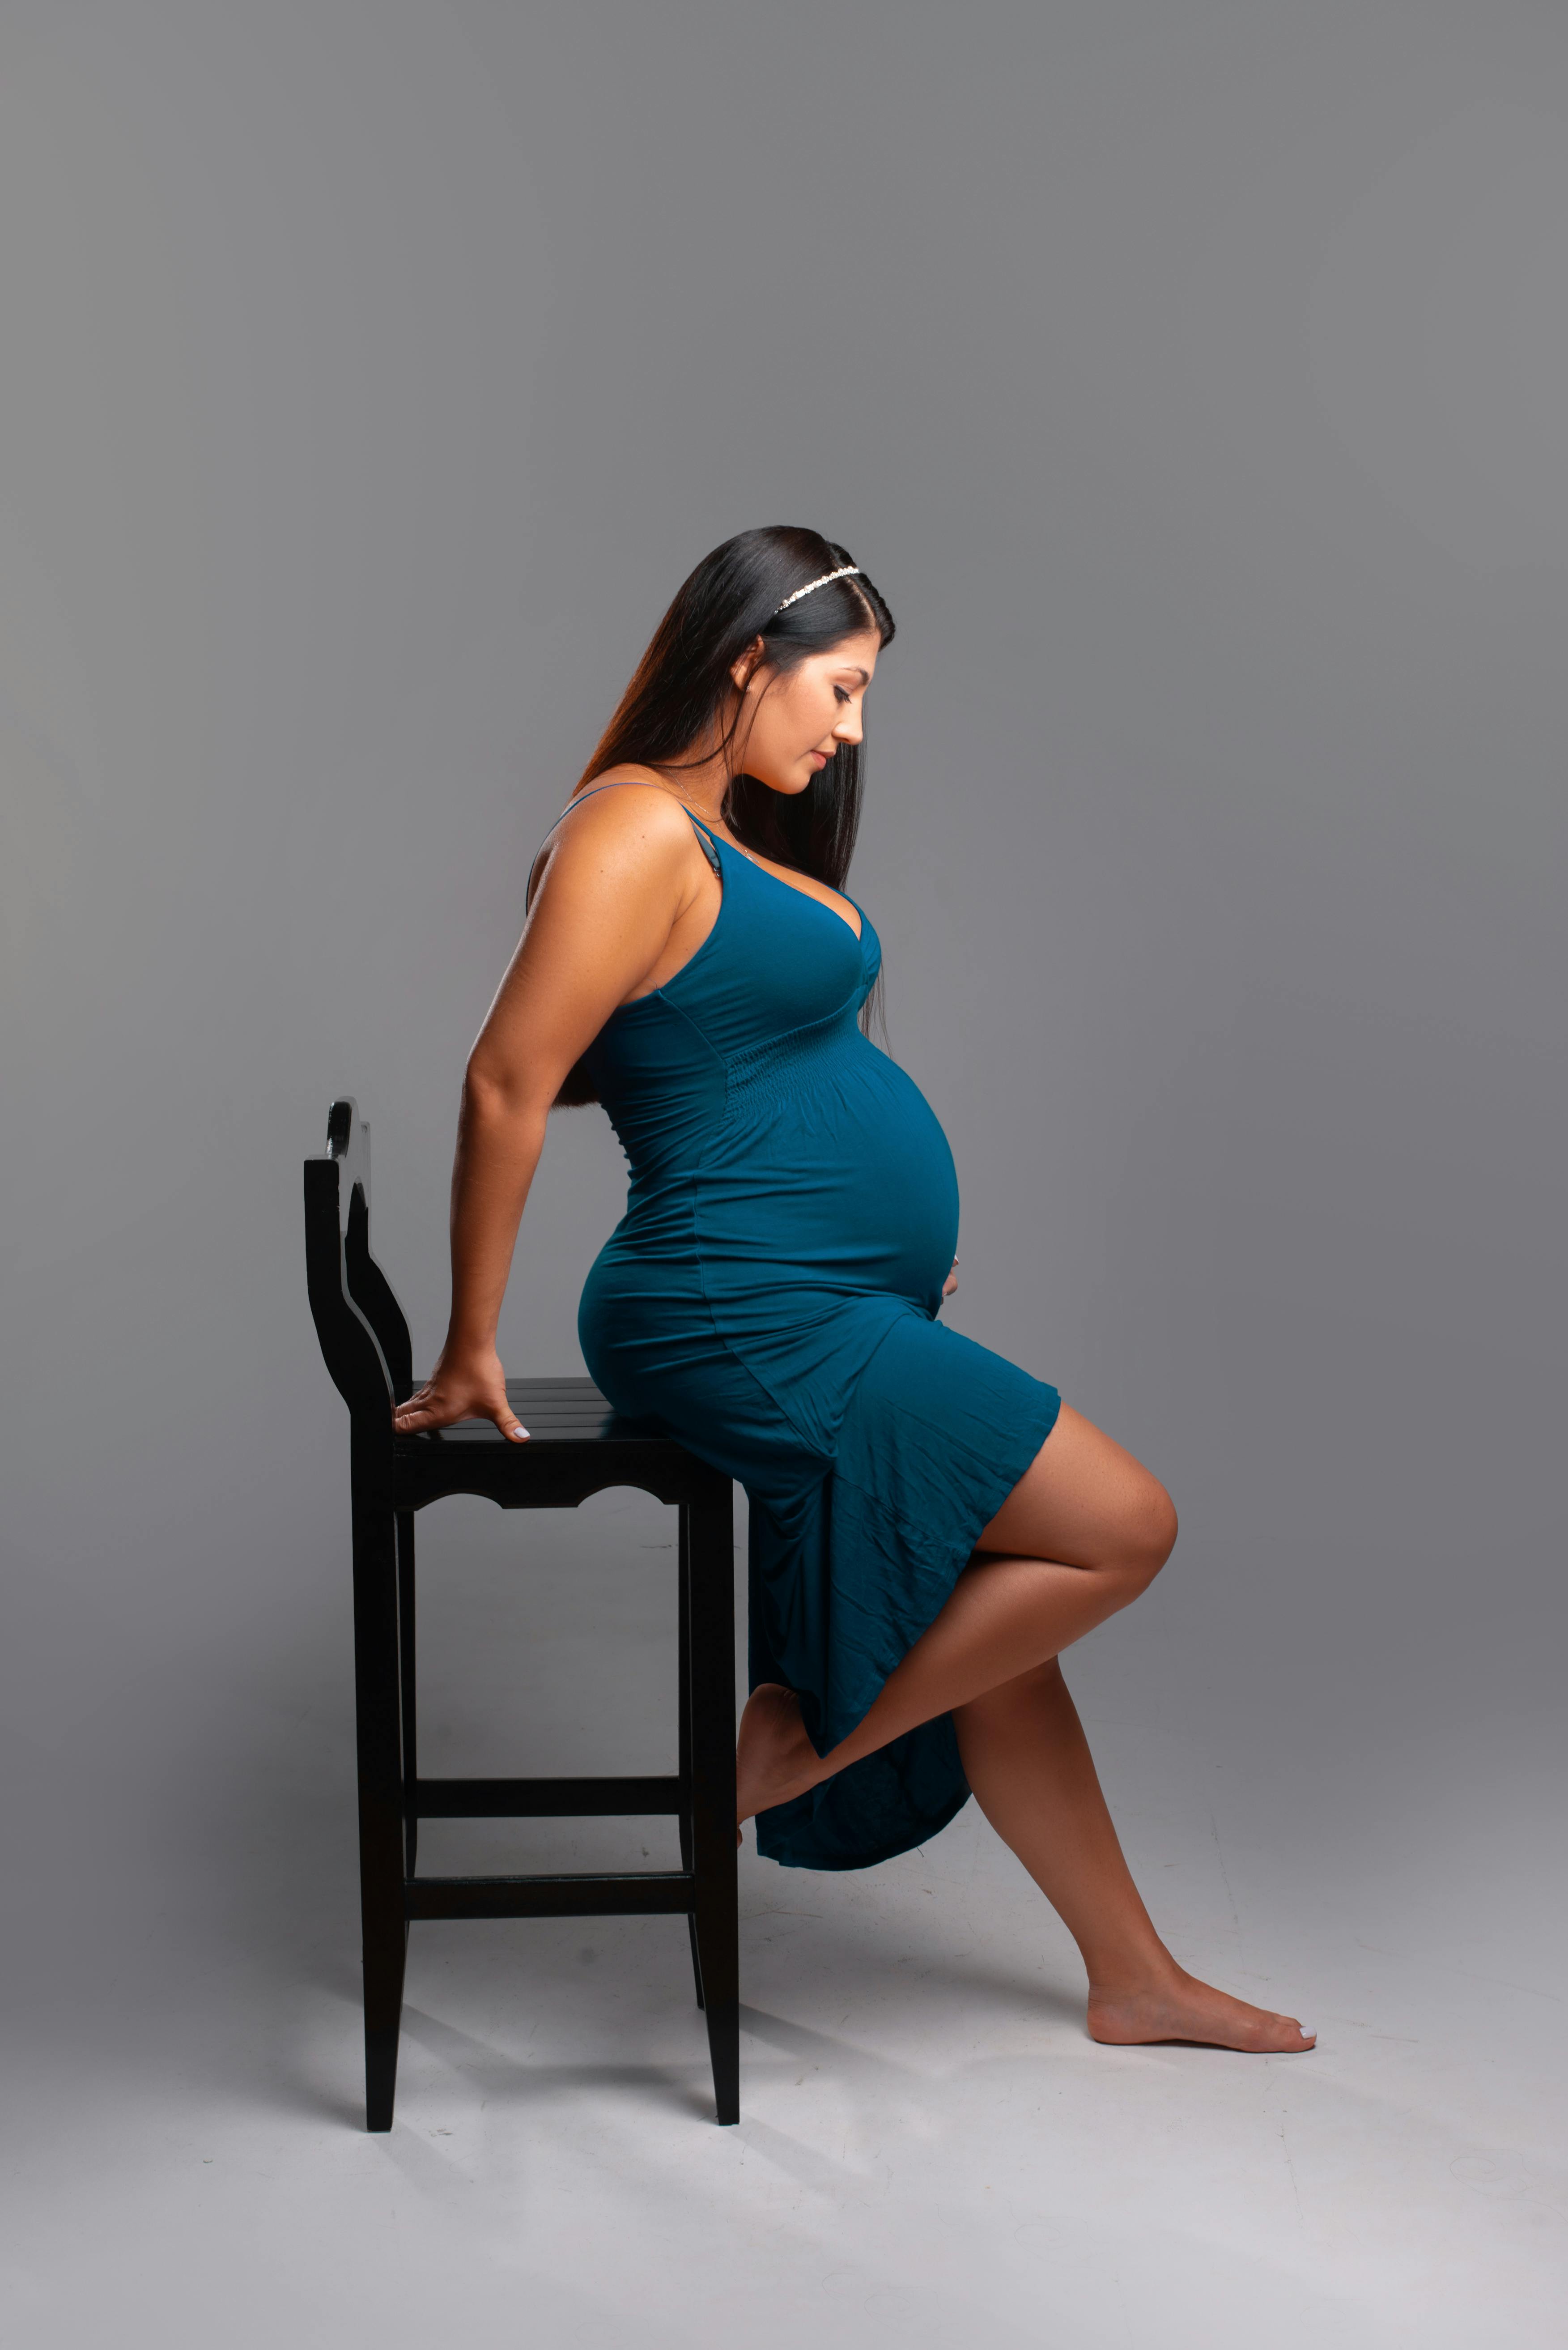 How to hide a (pregnant) belly in your headshot